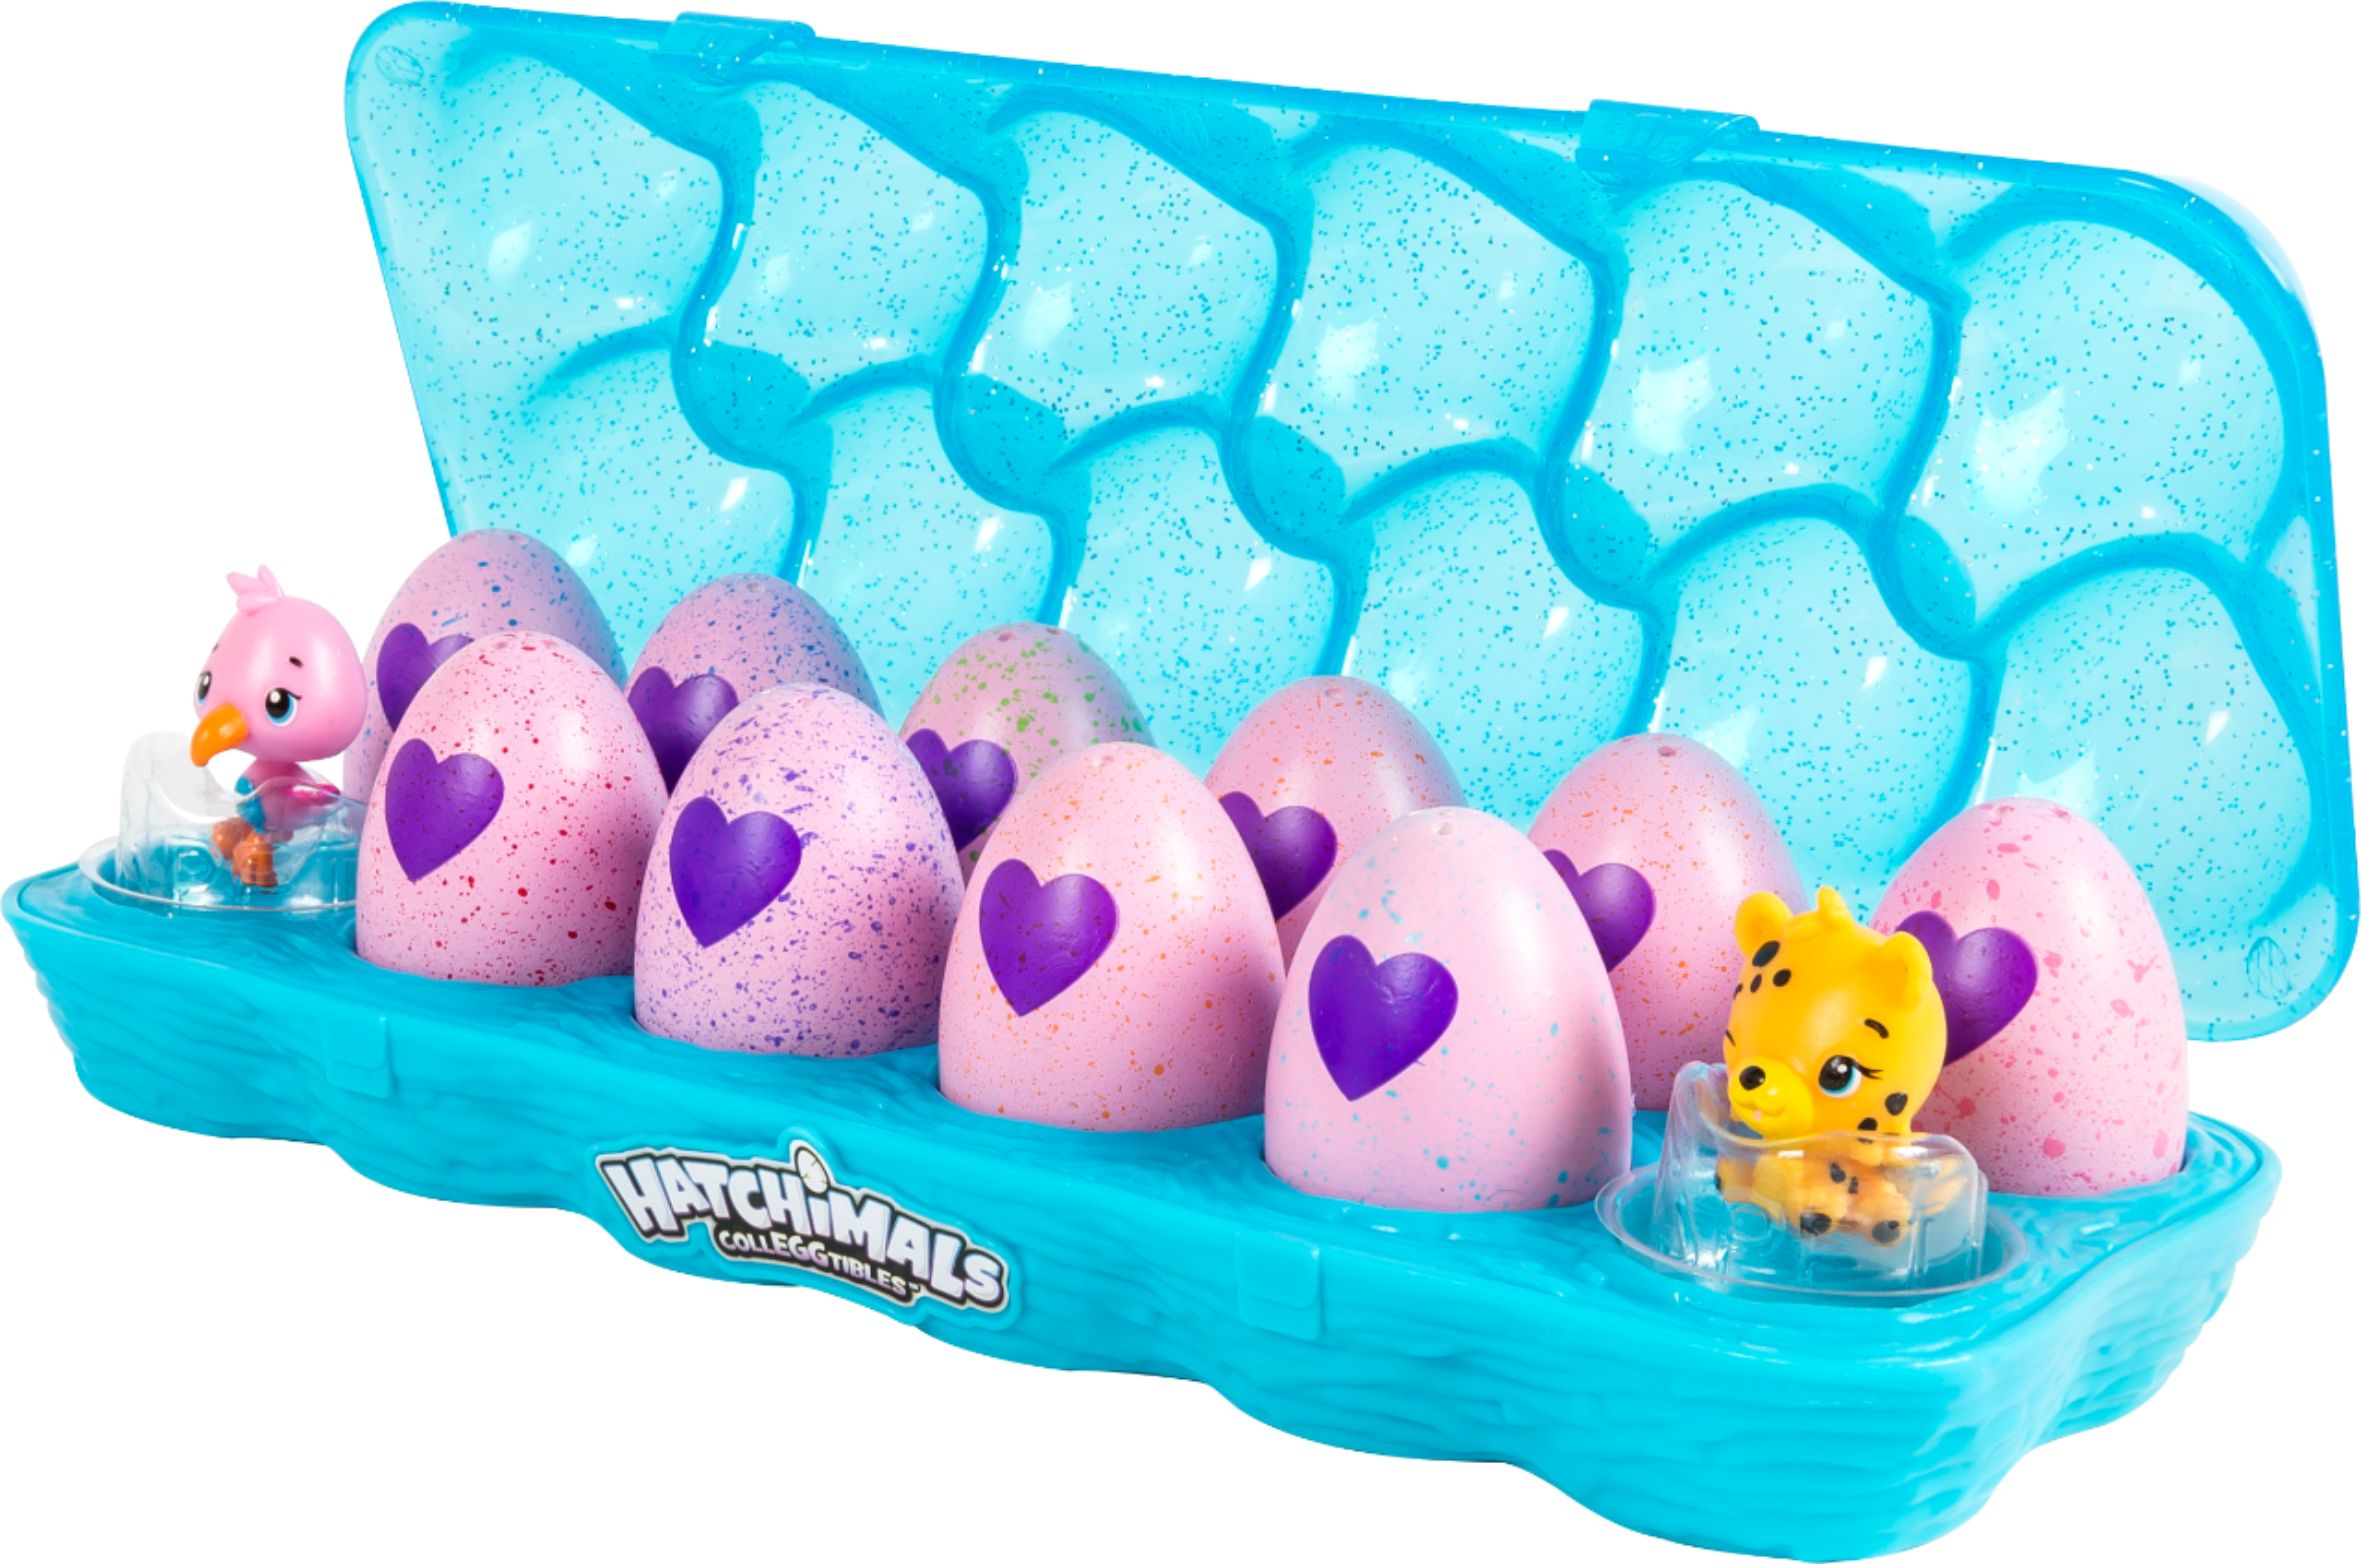 Hatchimals CollEGGtibles 12-Pack Egg Carton #0862 Ages 5 